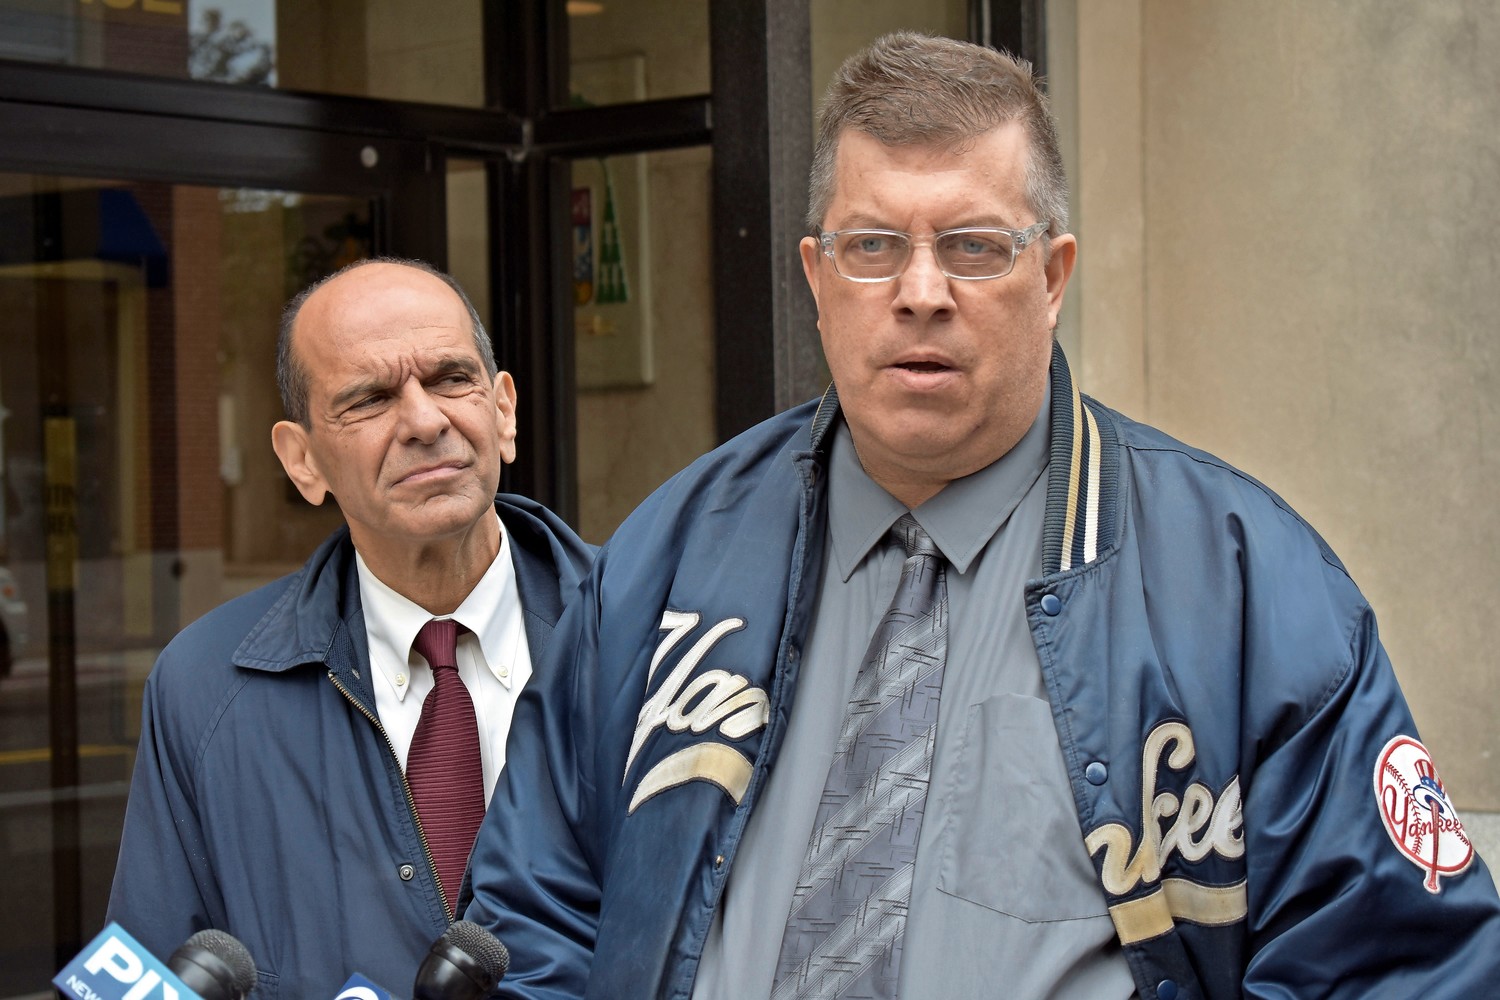 Thomas McGarvey, right, who received $500,000 through the Diocese of Rockville Centre’s Independent Reconciliation and Compensation Program, is one of 161 clergy sex abuse victims who have been paid settlements so far. Boston attorney Mitchell Garabedian, left, represented him.